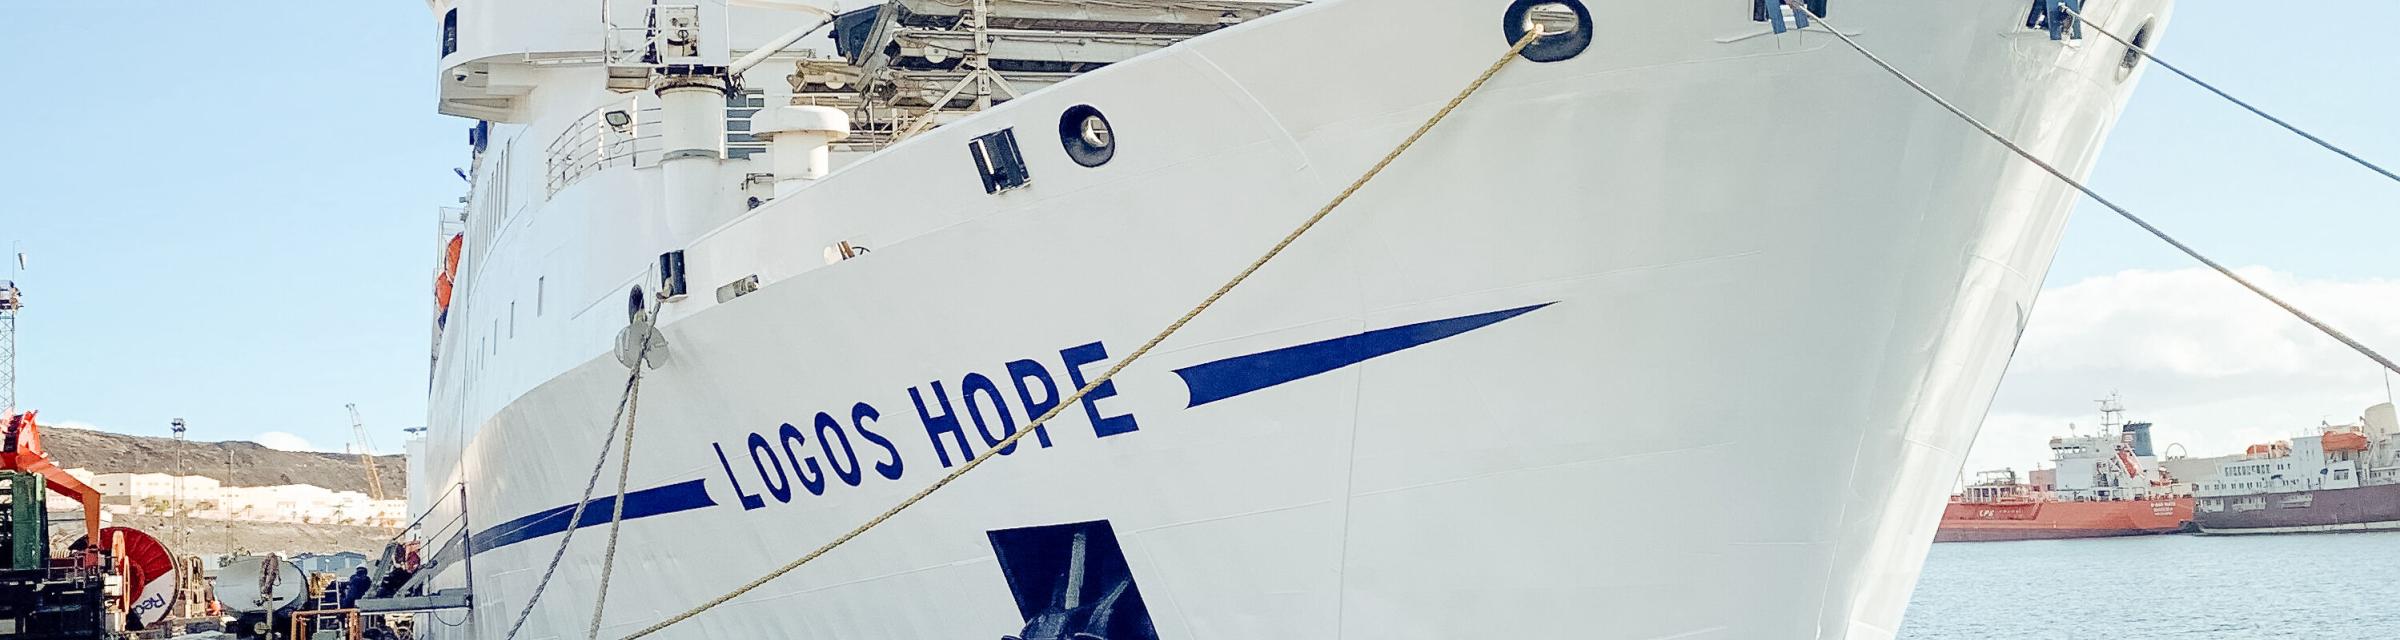 Las Palmas, Canary Islands :: Logos Hope back in the water at a berth in the shipyard after dry dock.